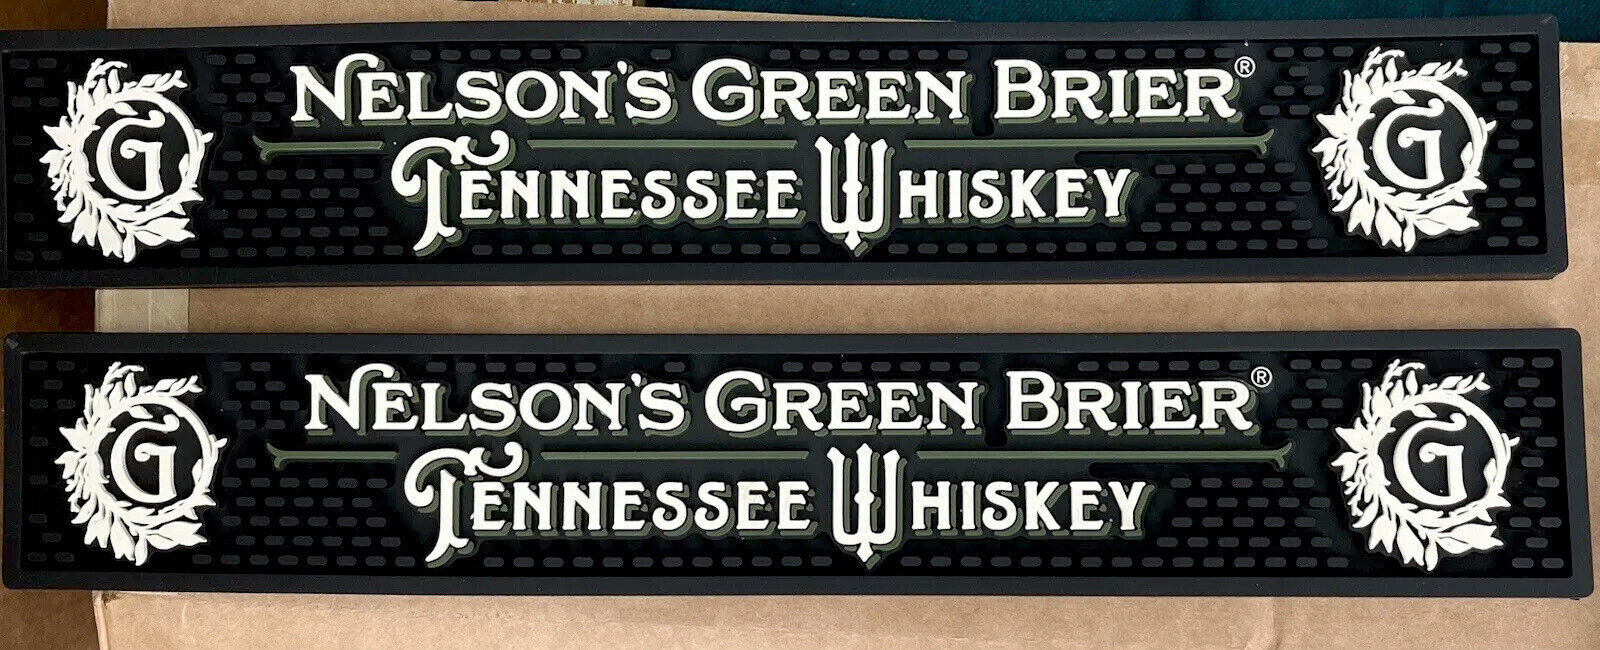 *TWO NEW* Nelsons Green Brier Tennessee Whiskey Rubber Bar Rail Spill Mat 21x3.5